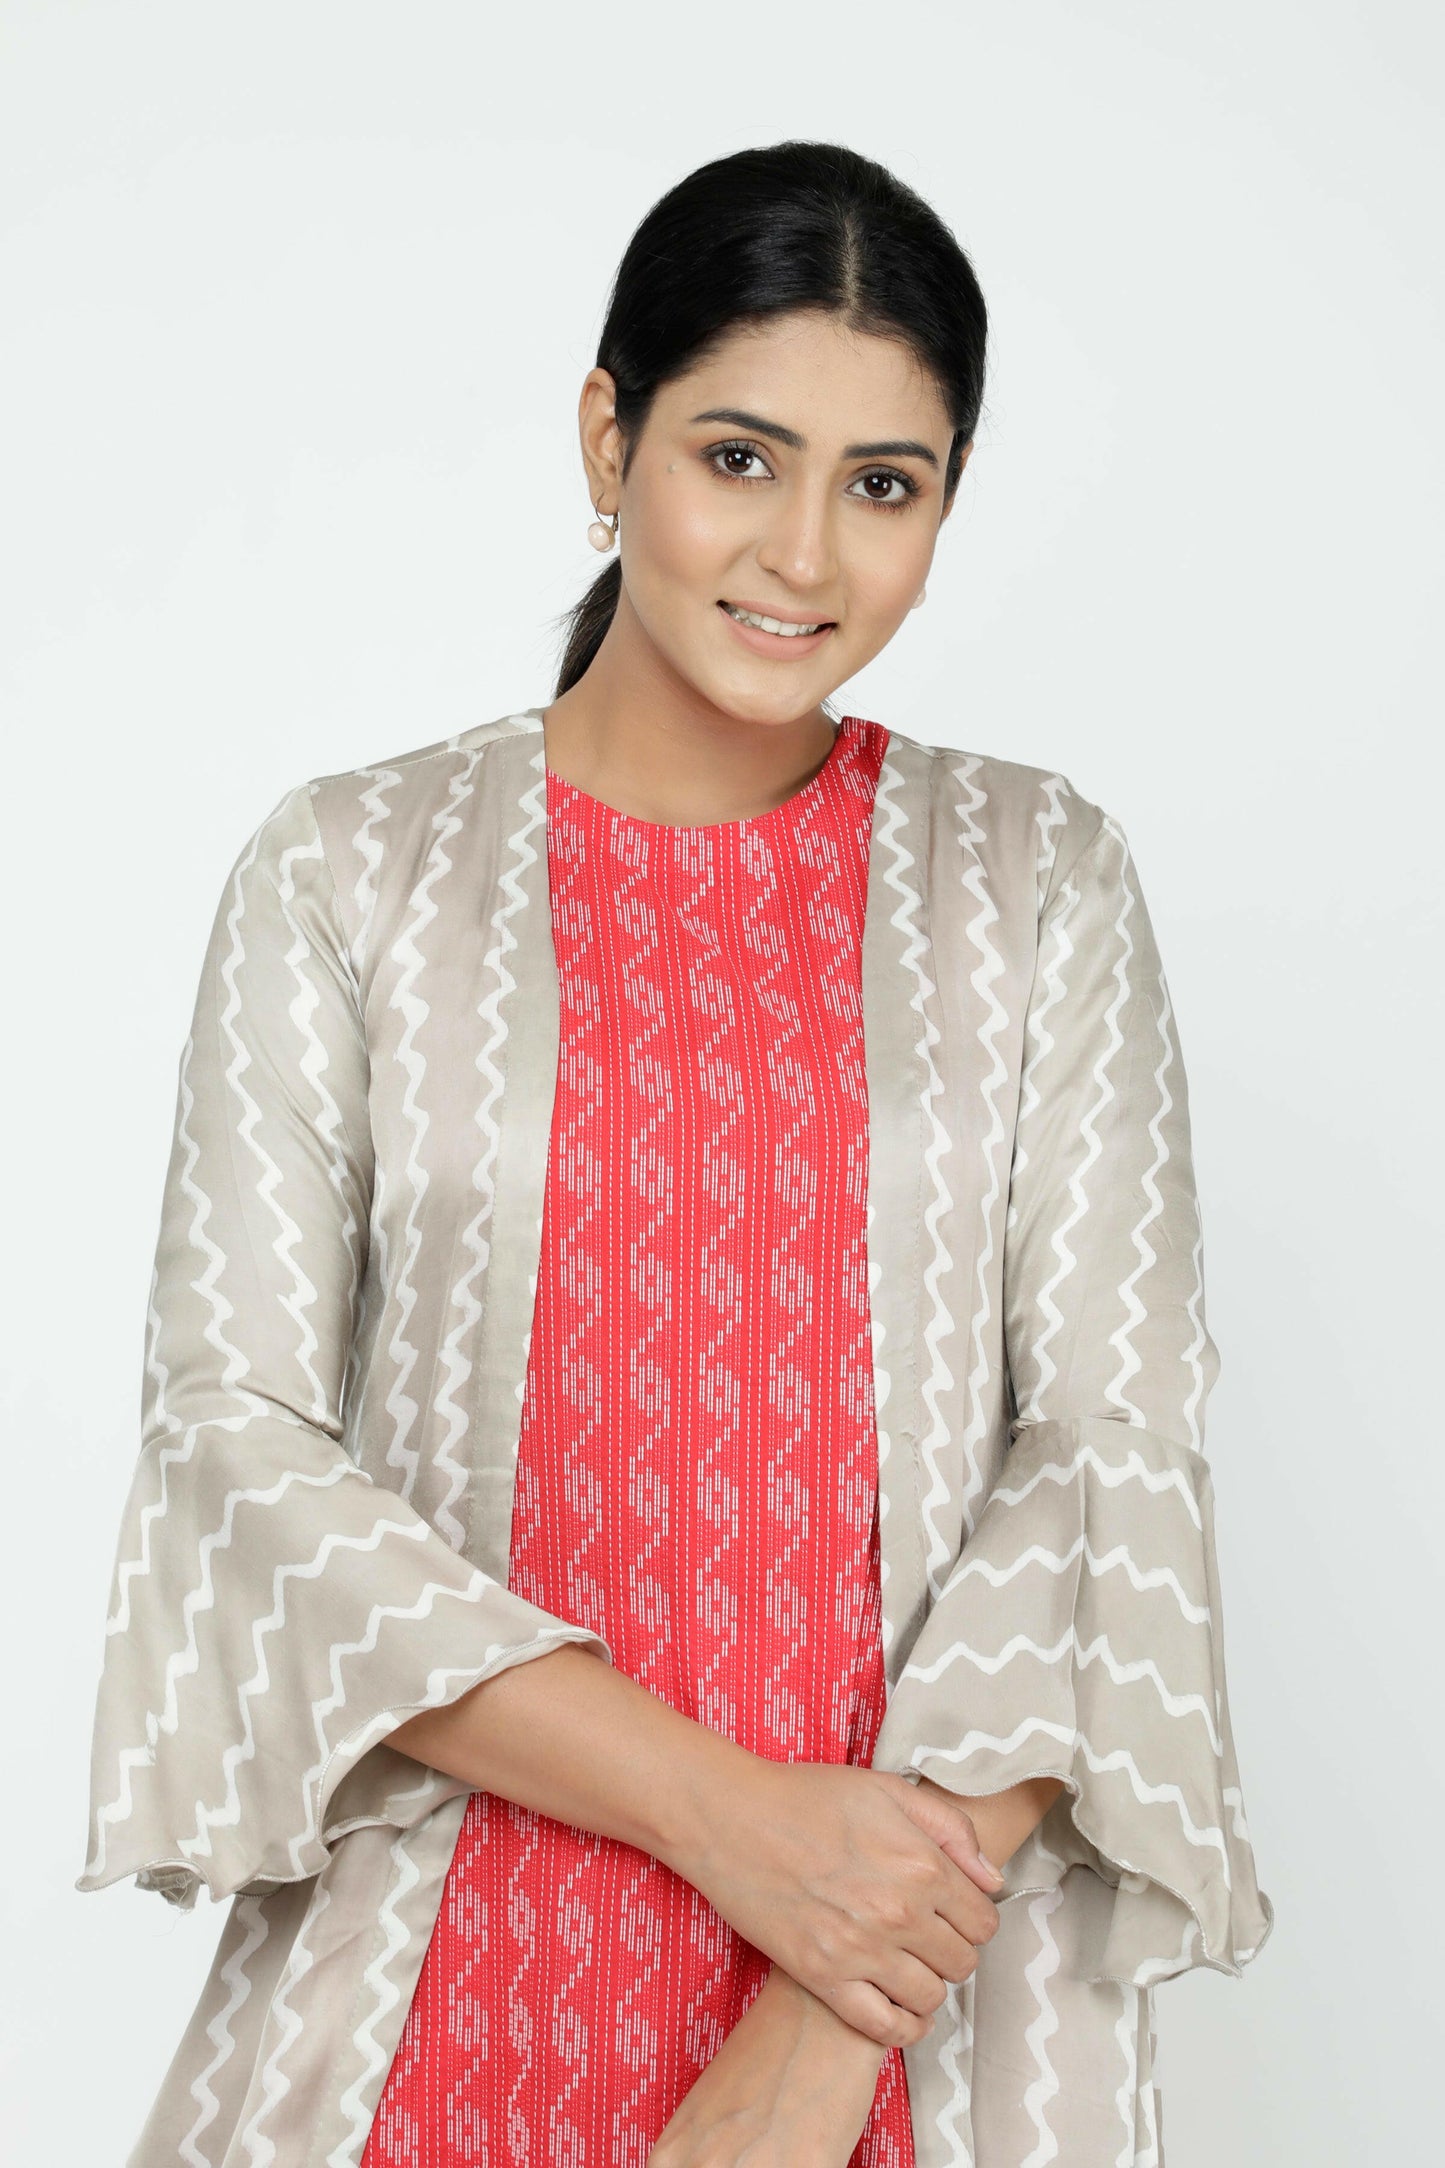 Red Kantha Kurta With Embroidered Jacket